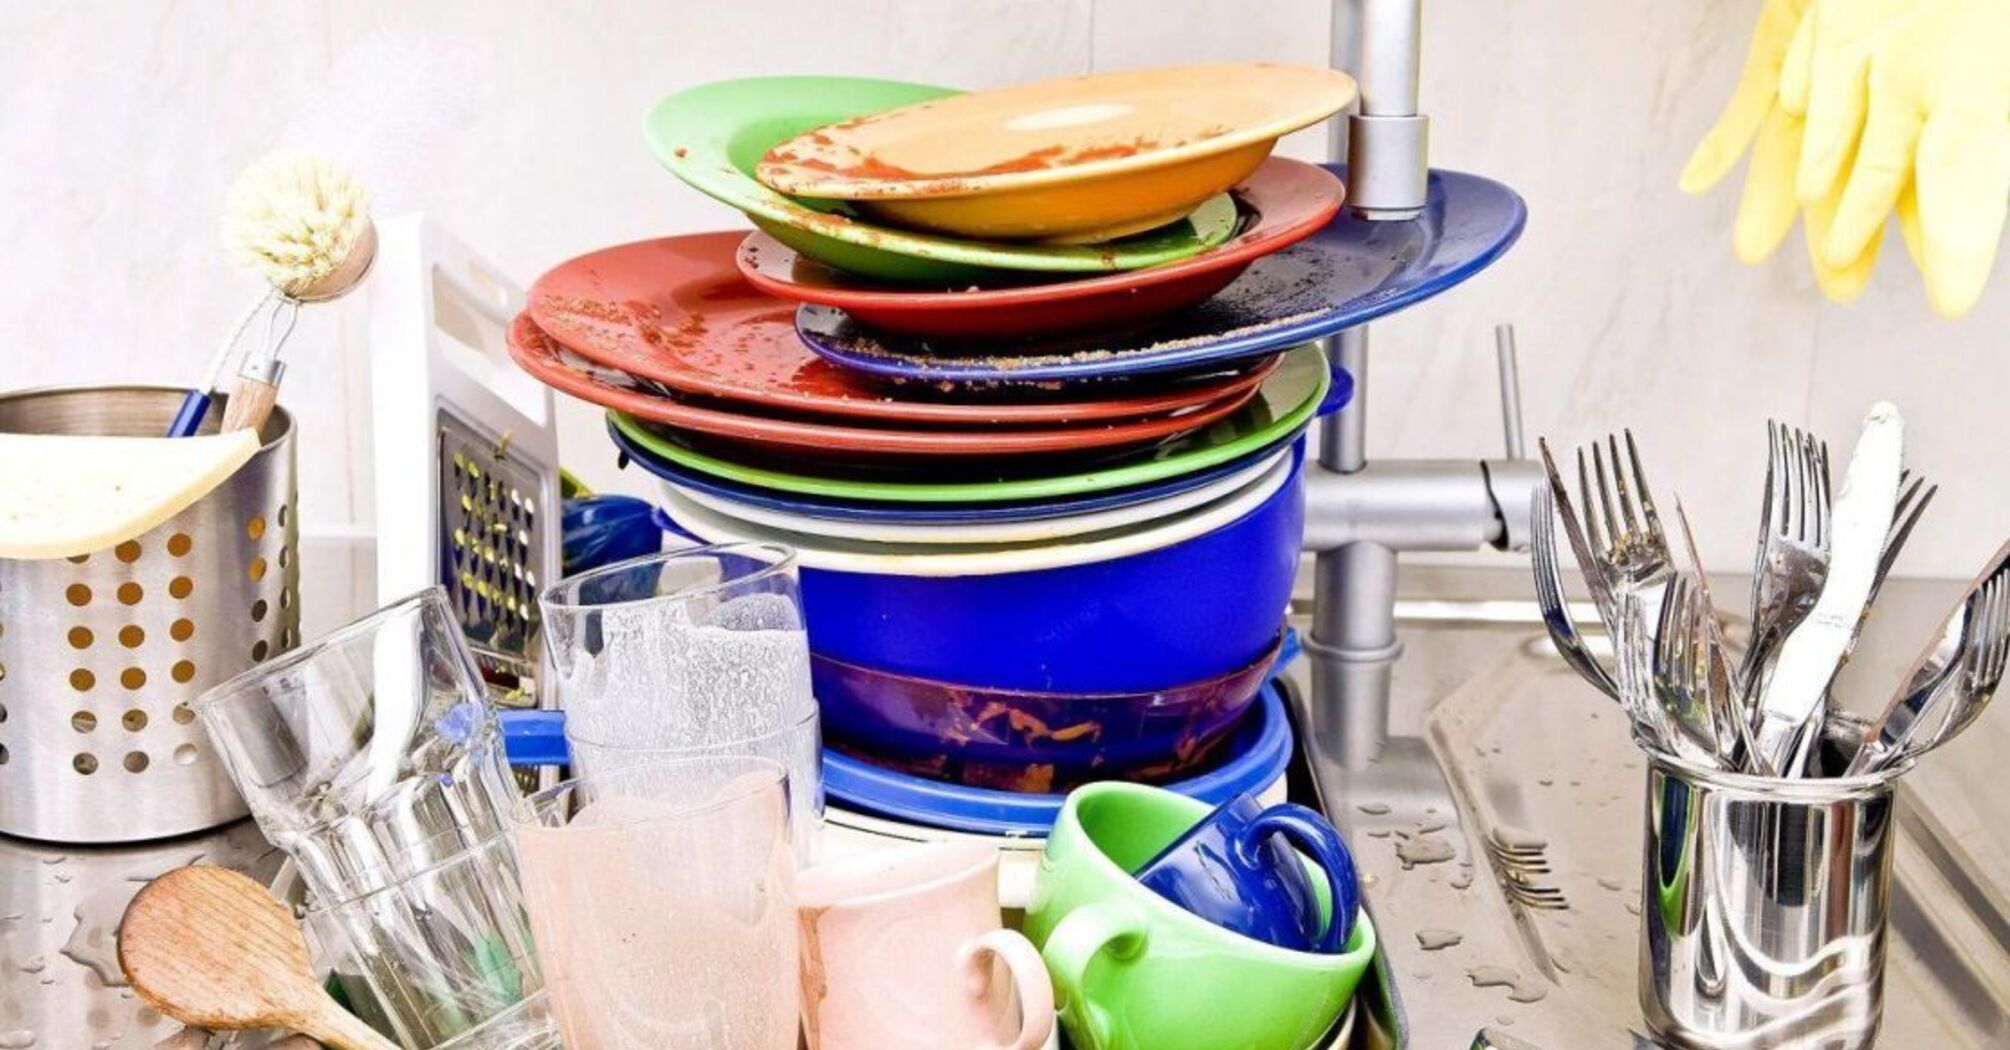 Why it's not advisable to leave unwashed dishes overnight